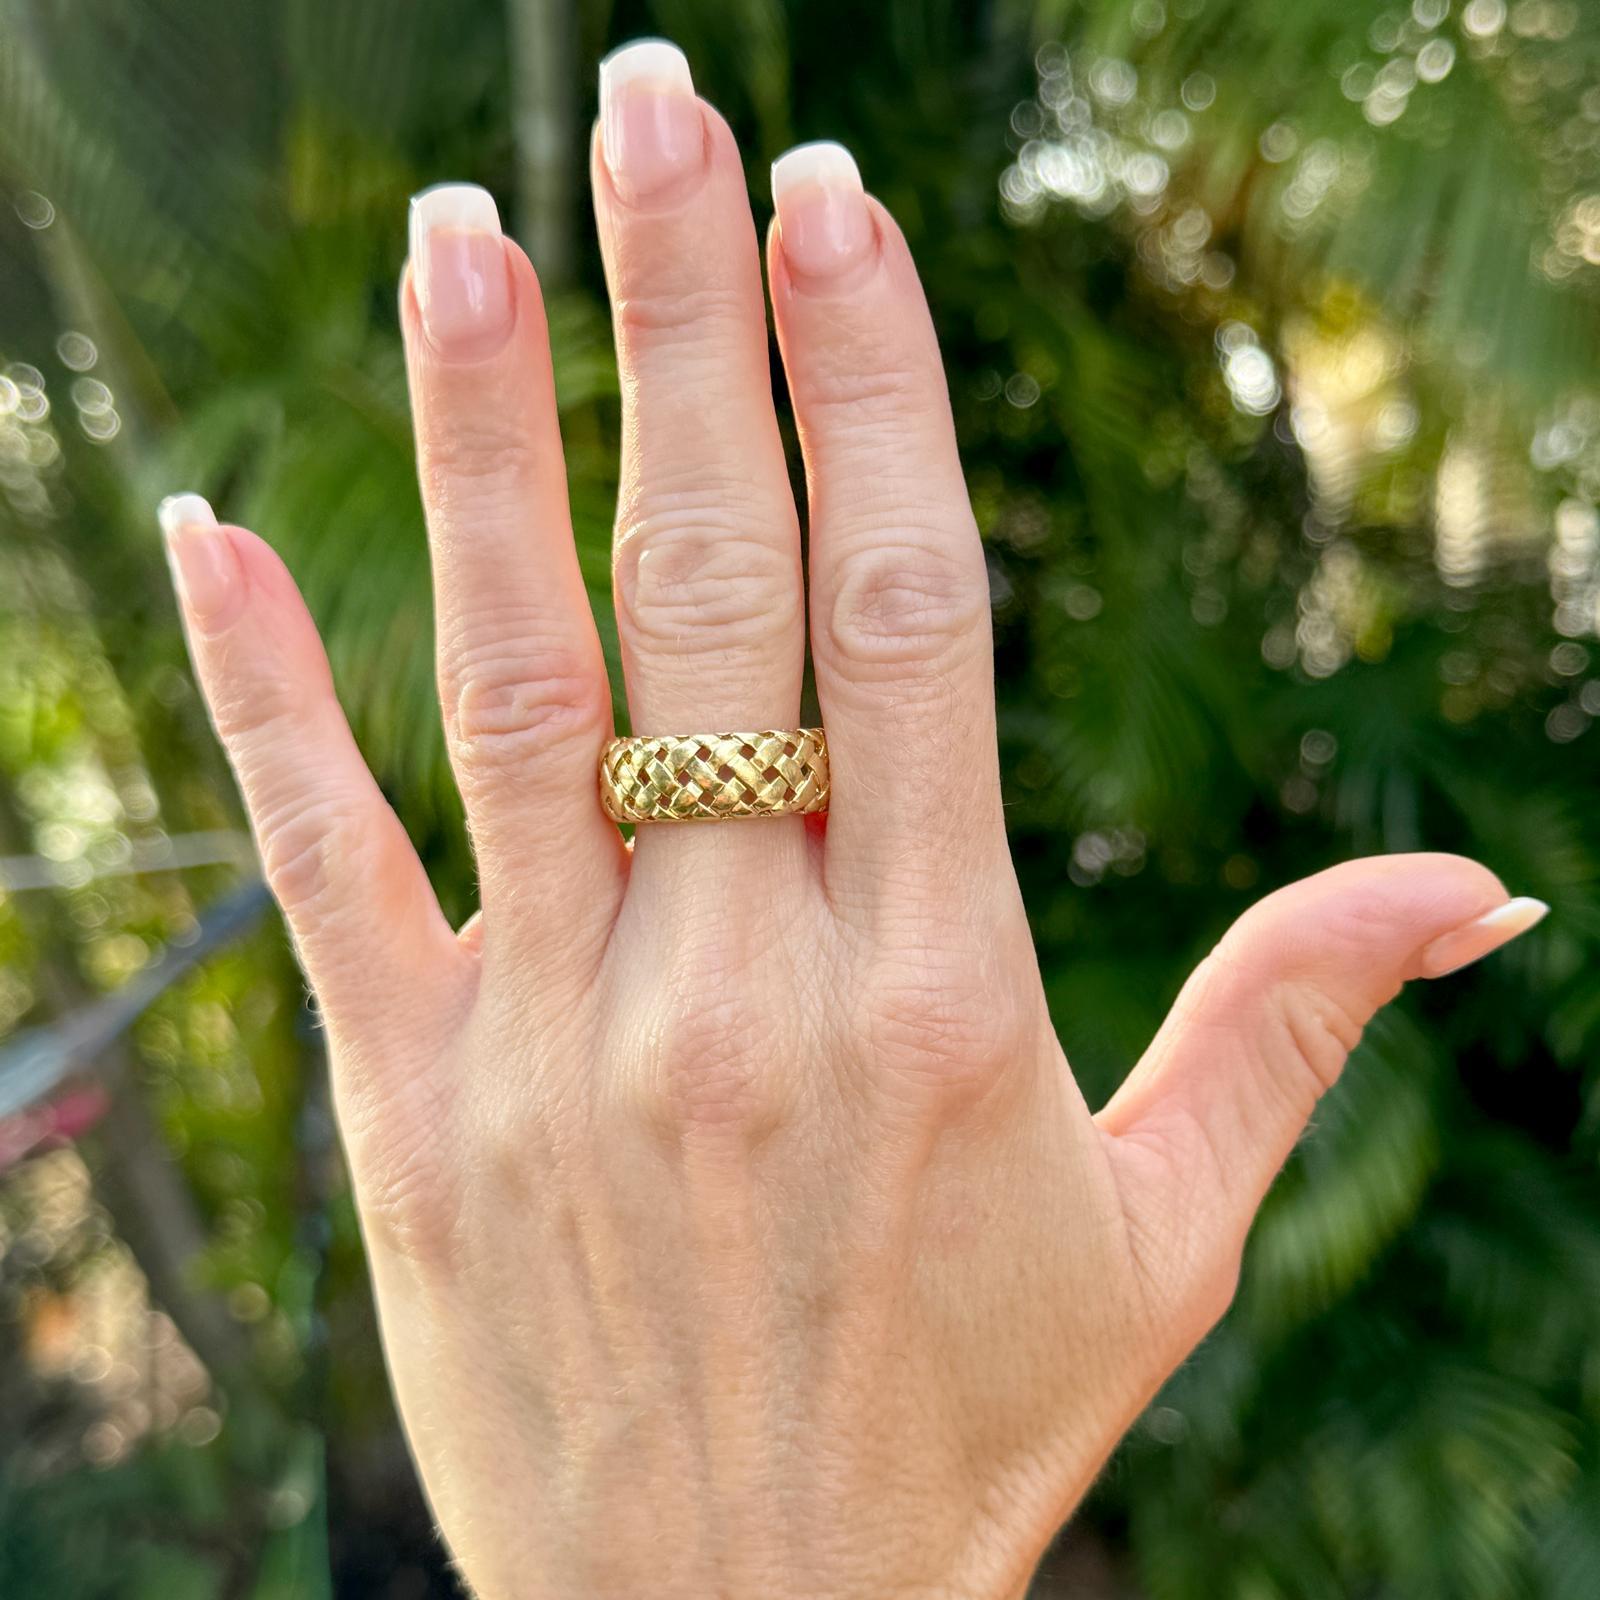 1995 Tiffany & Co. Basket Weave 18 Karat Yellow Gold Band Ring, Size 8 In Excellent Condition For Sale In Boca Raton, FL